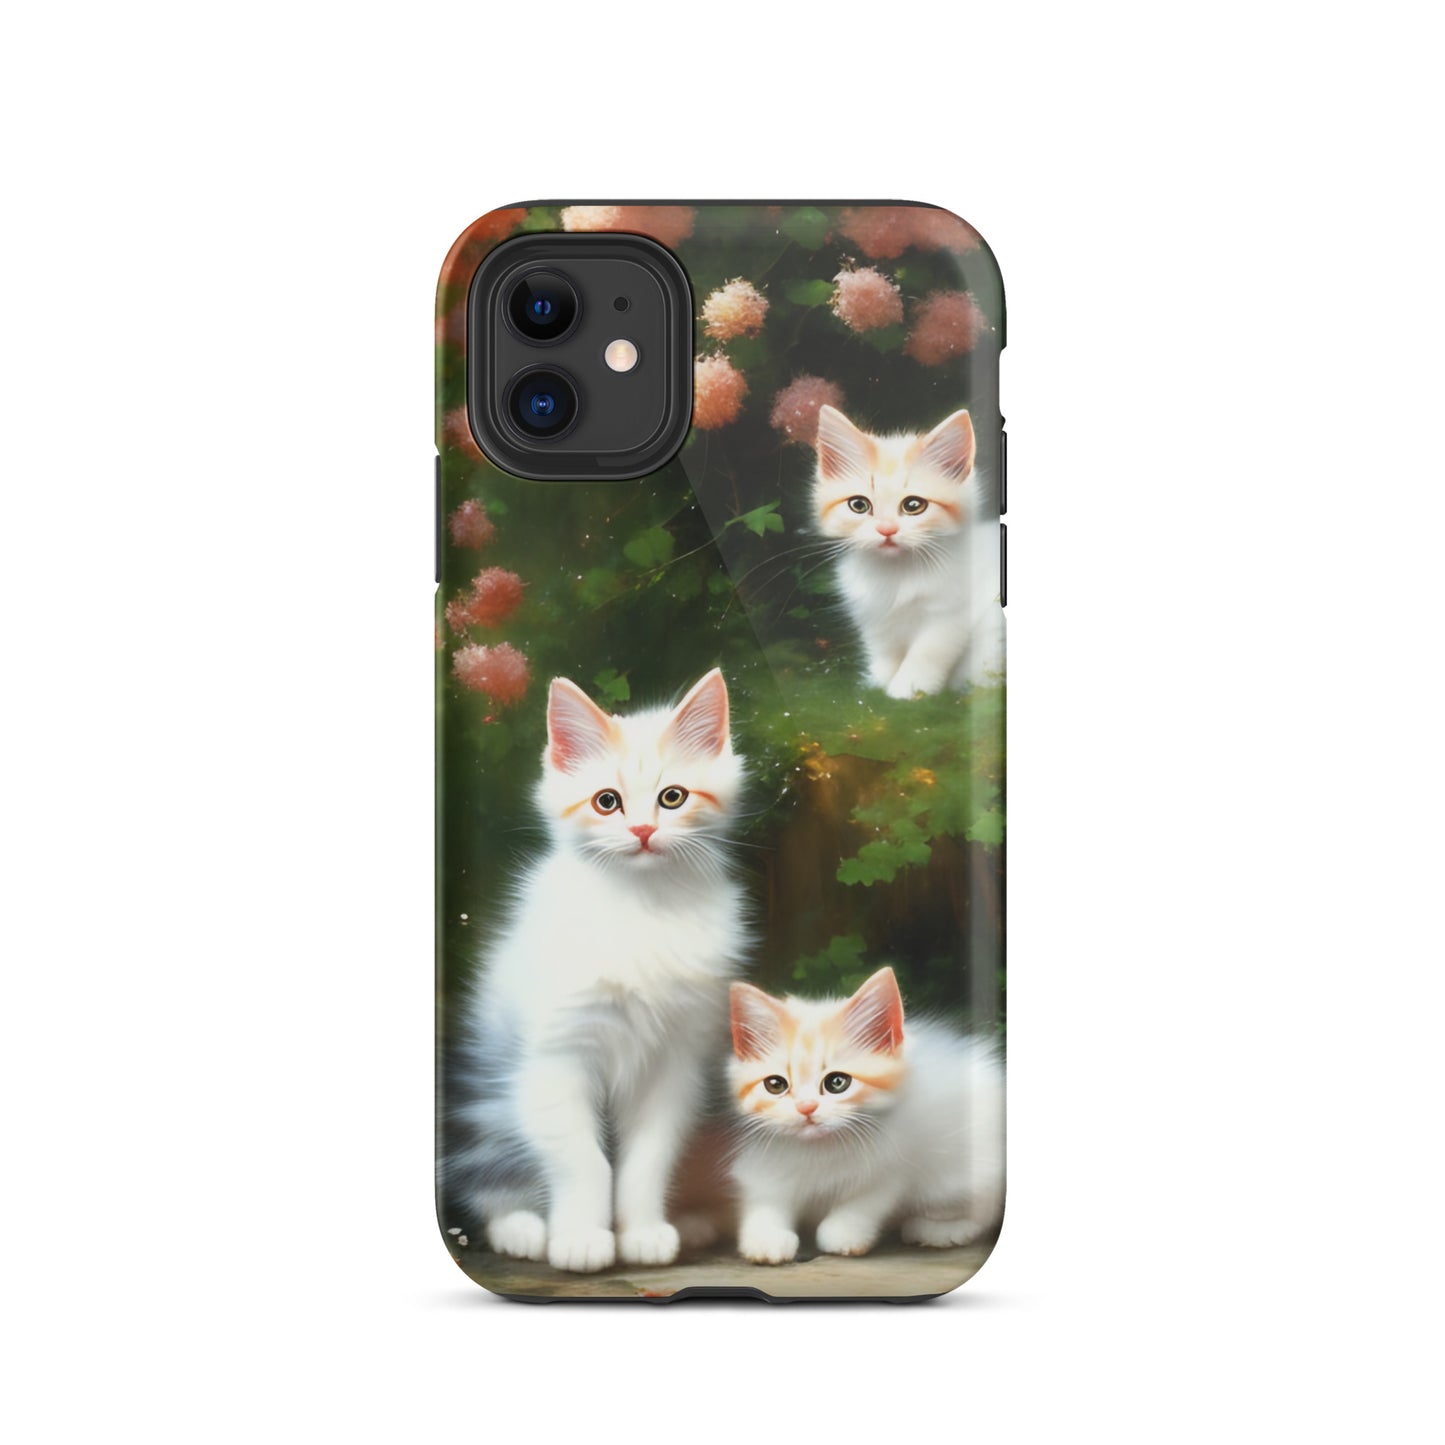 A picture of a iphone tough case with 3 fluffy white and orange kittens and peach colored flowers in the background - glossy-iphone-11-front